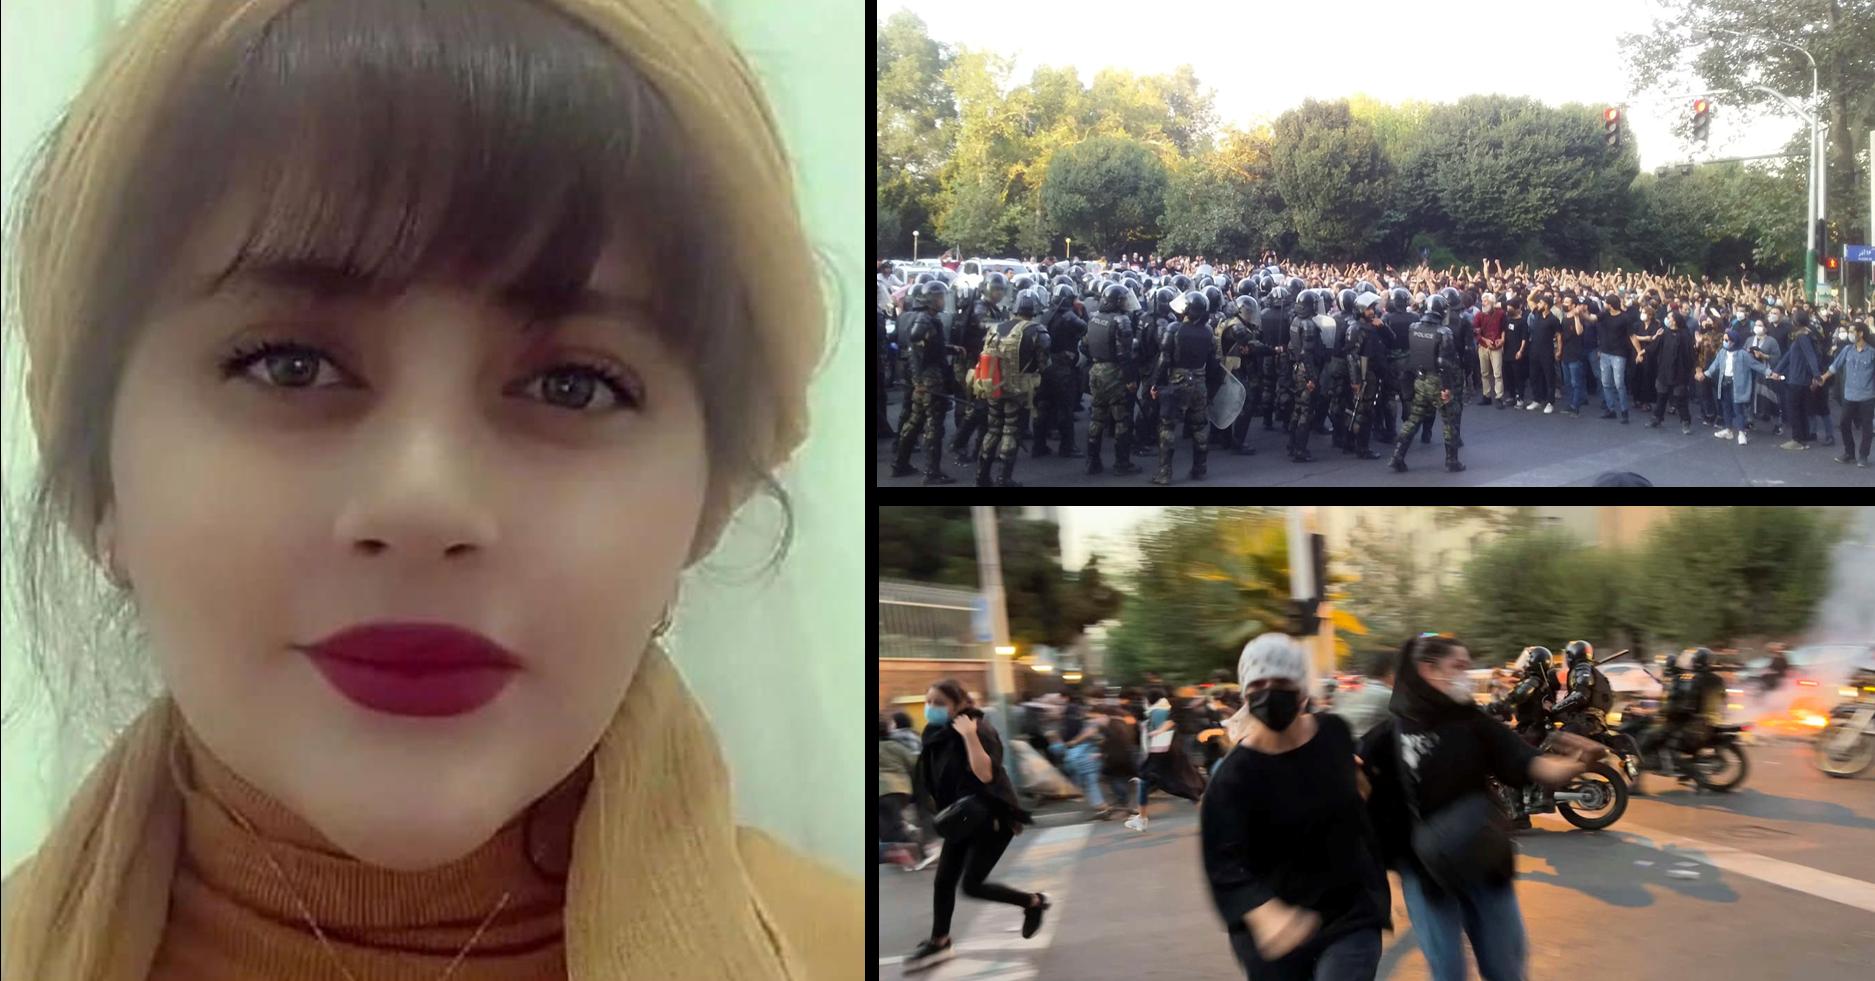 Iran on Flames after Morality Police murder of Mahsa Amini- Videos and Reports